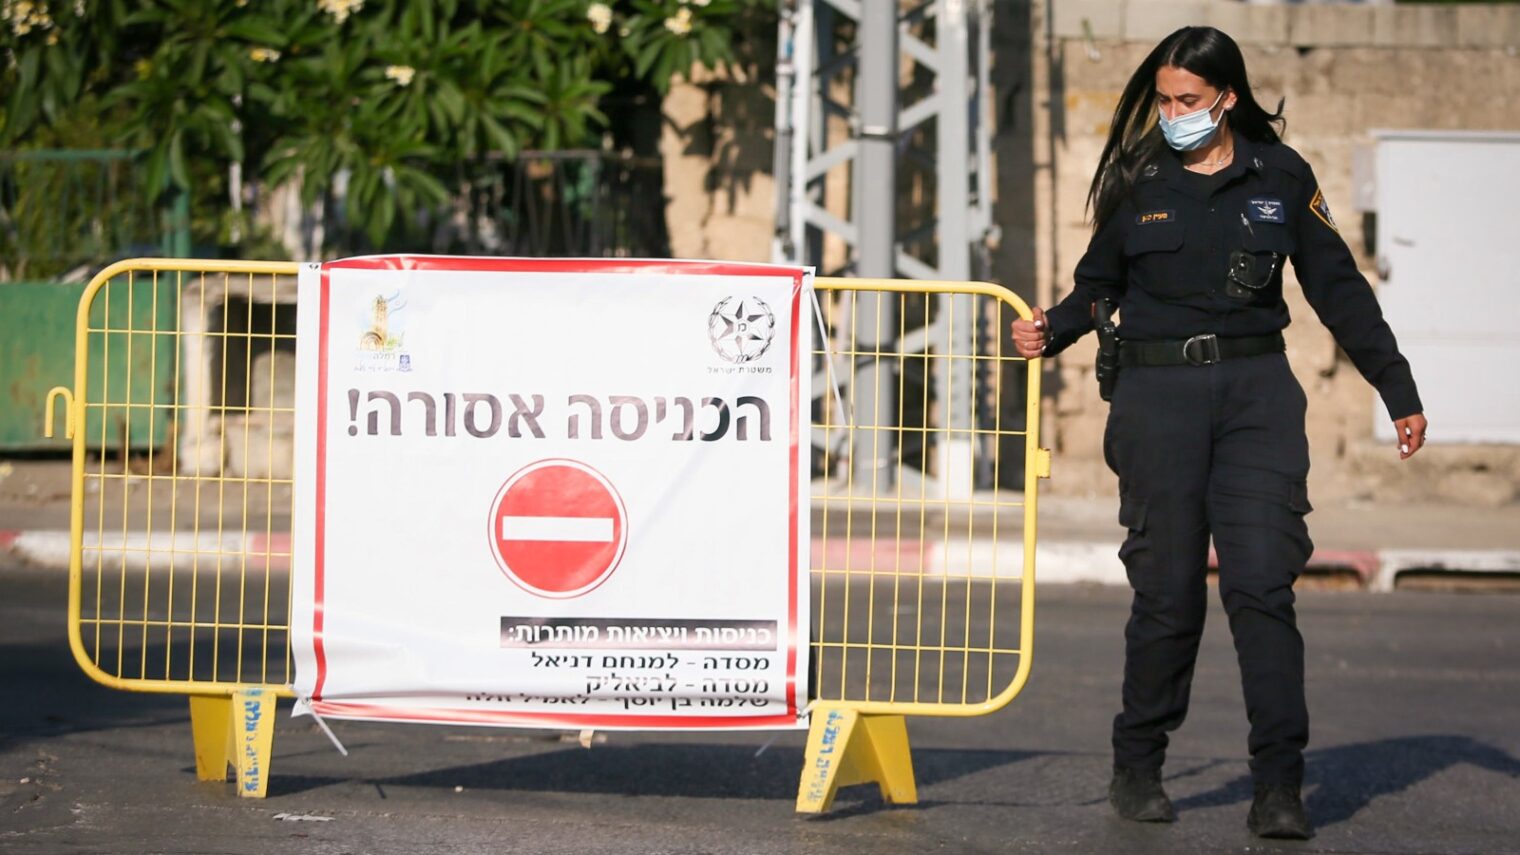 Israeli police setting up a roadblock ahead of a lockdown to prevent the spread of the coronavirus. Photo by Yossi Aloni/FLASH90